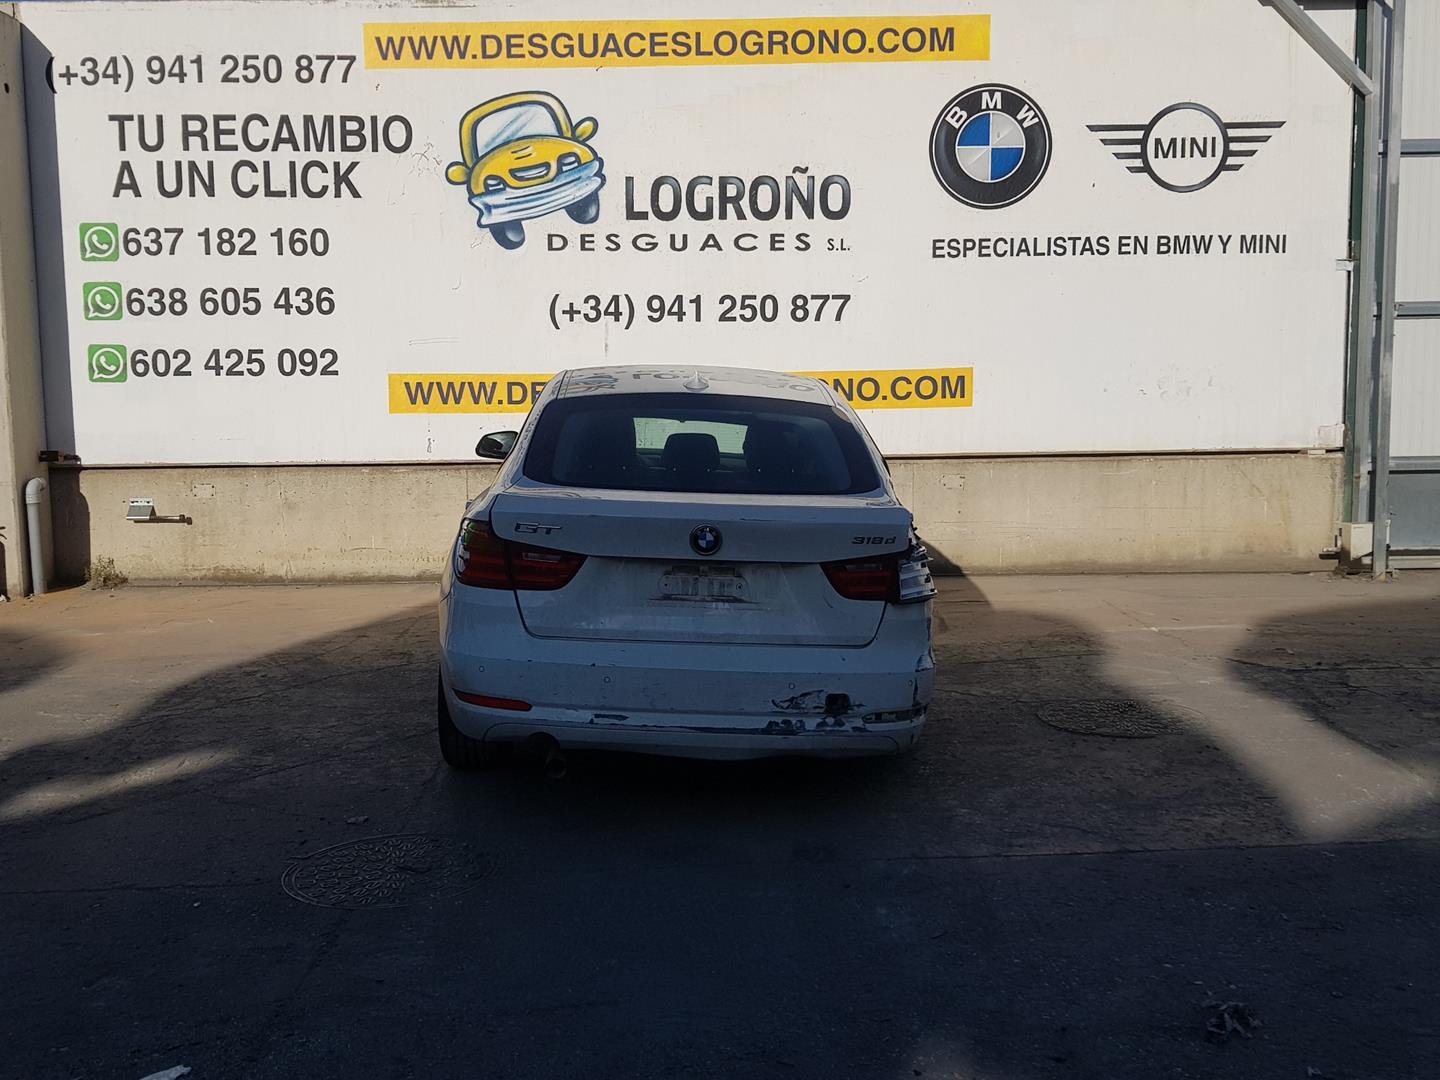 BMW 3 Series Gran Turismo F34 (2013-2017) Other Control Units 61359387624, 61355A70A02 19890050